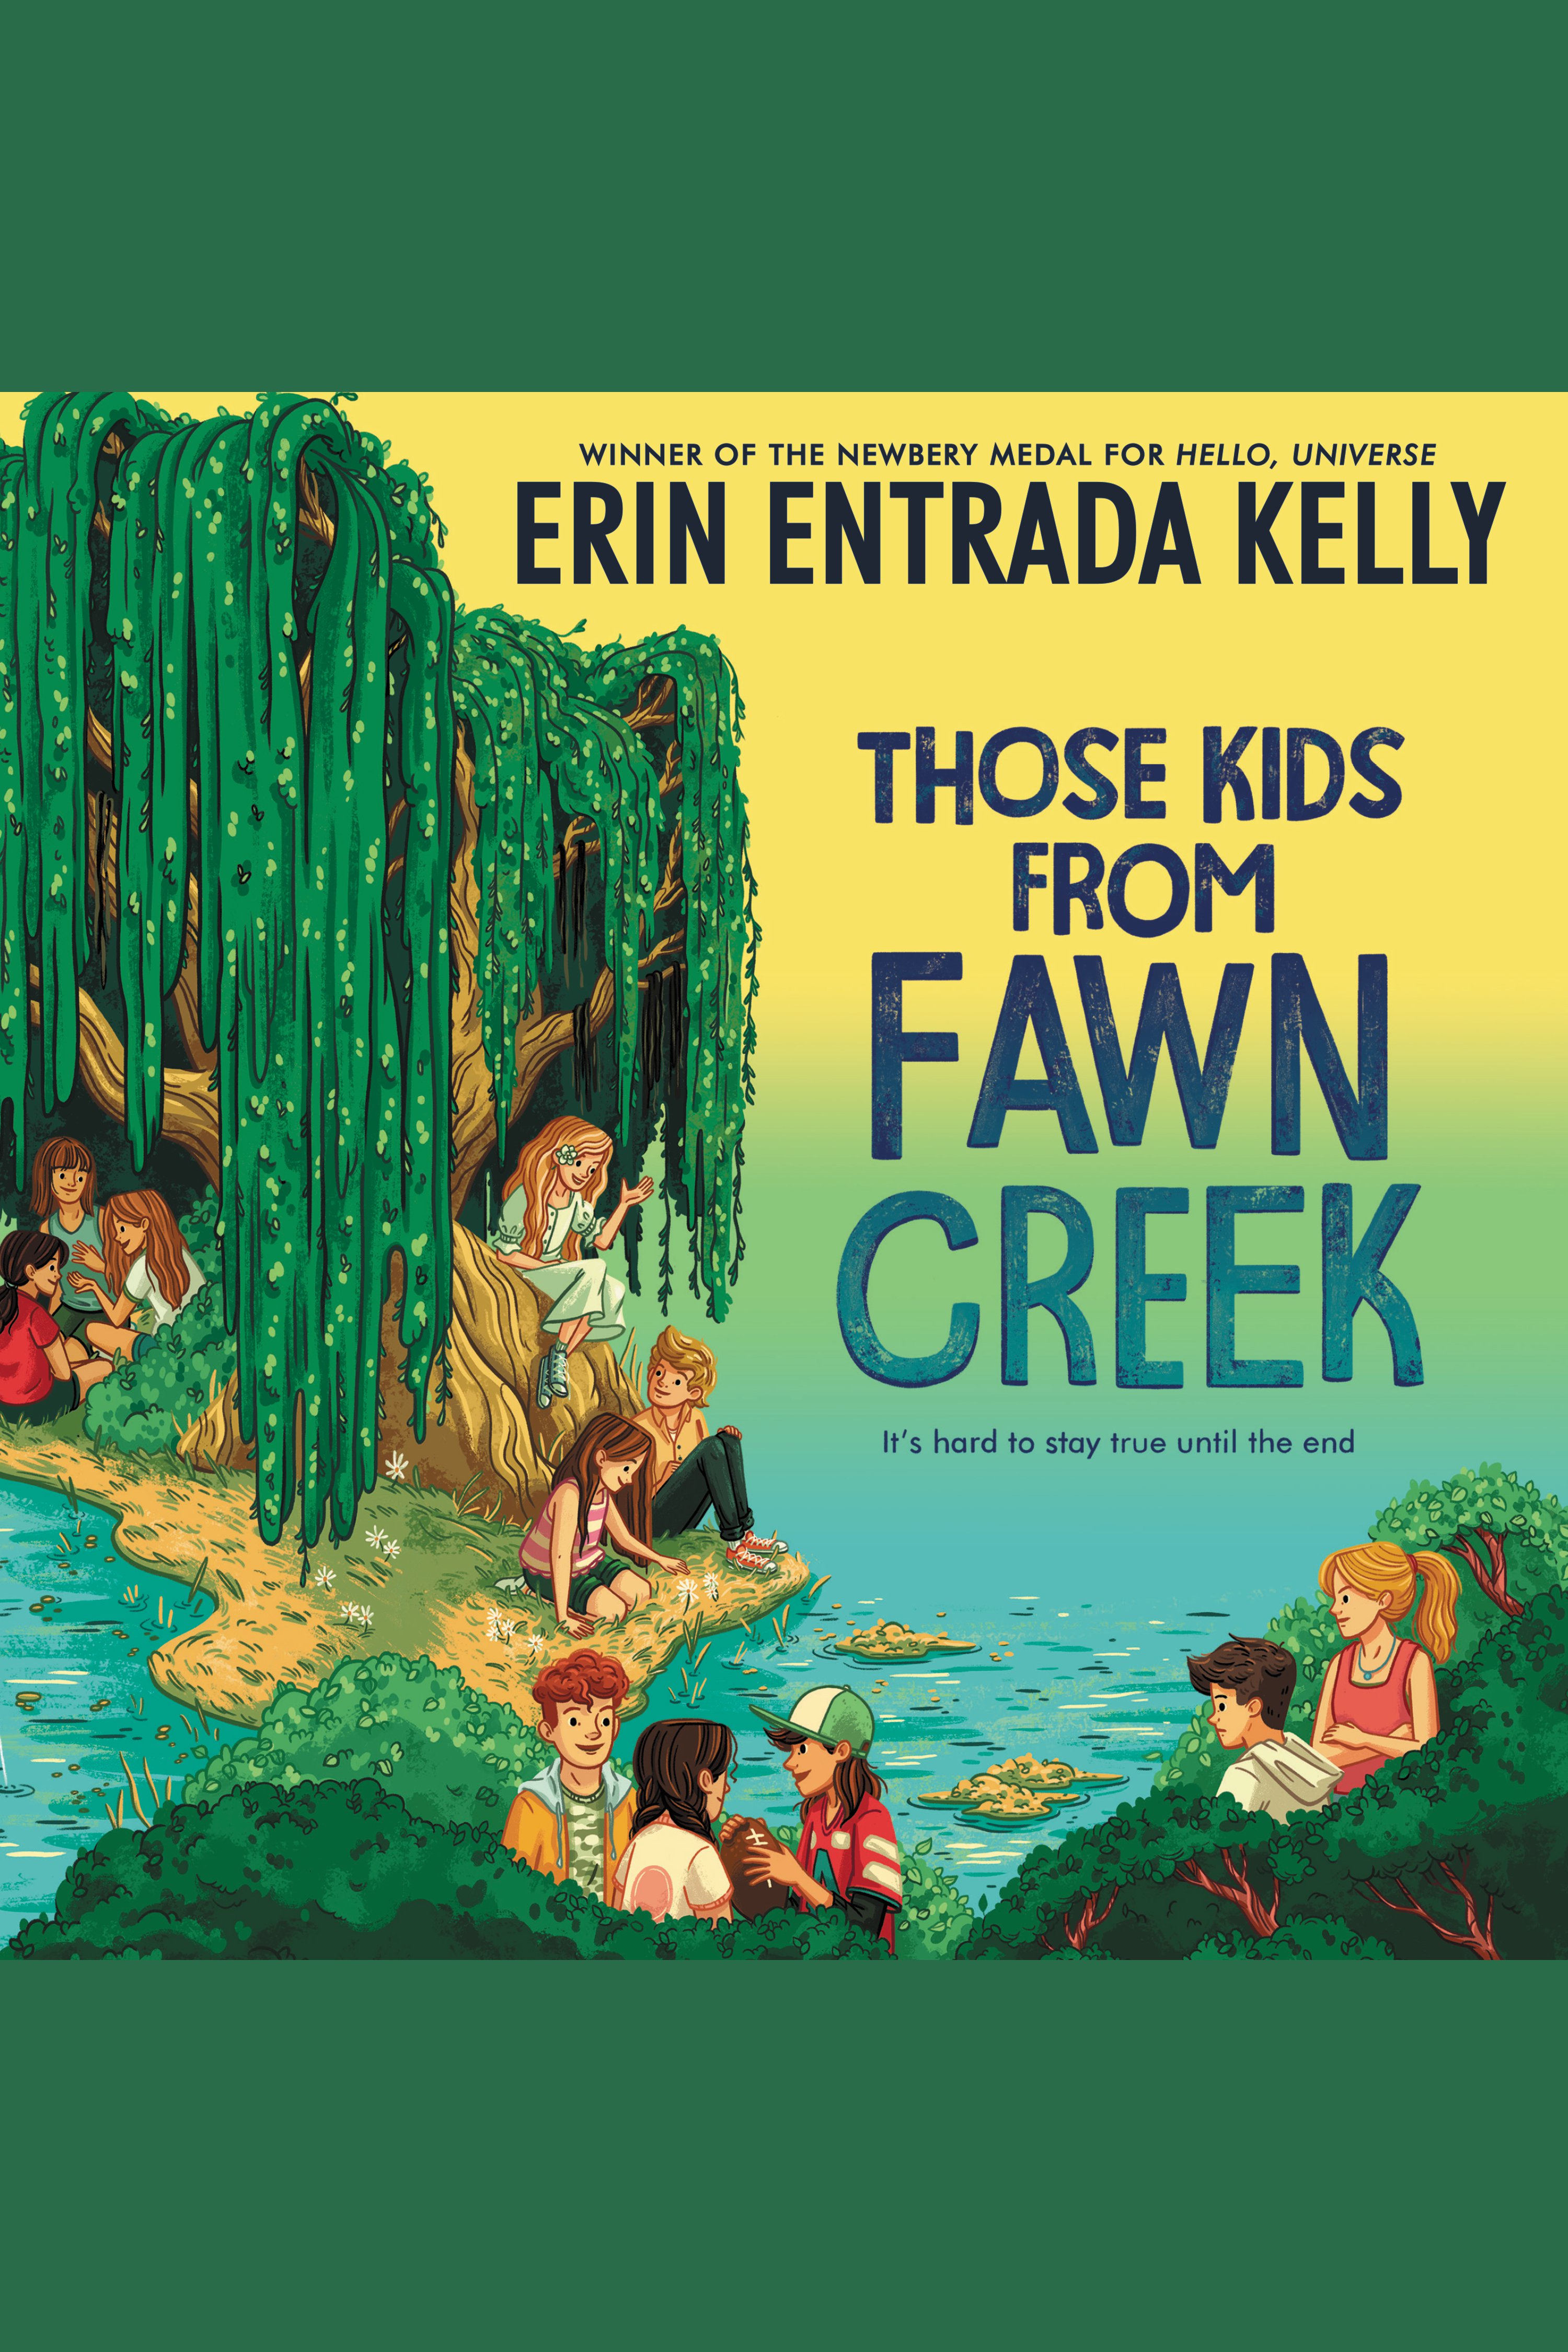 Cover Image of Those Kids from Fawn Creek